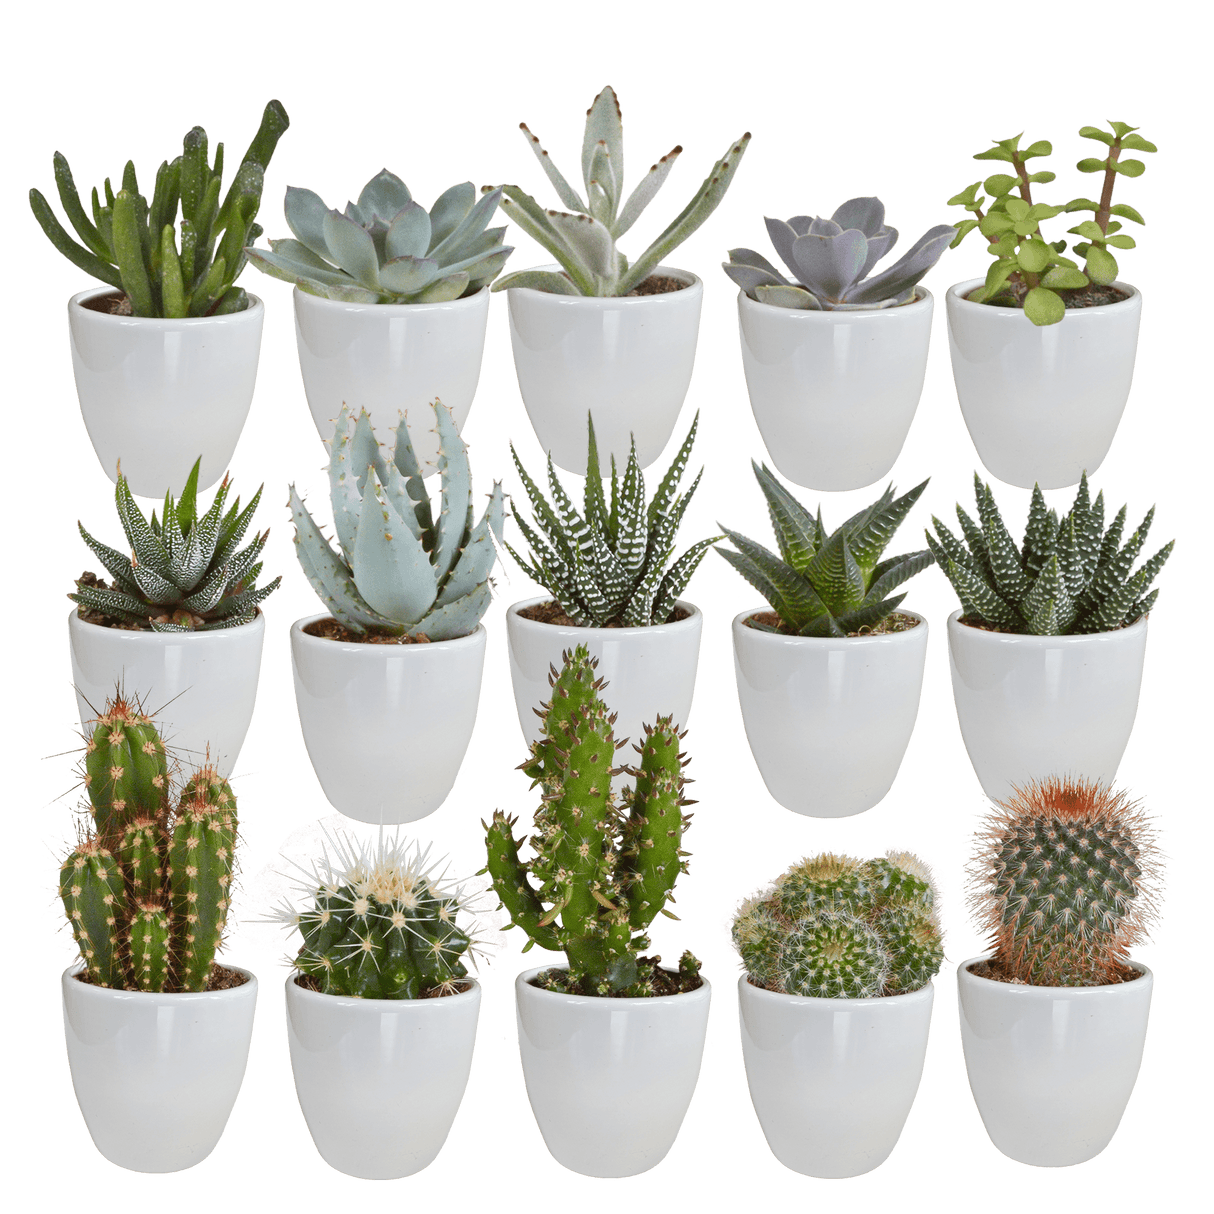 Cactus box and its white covers-POTS - Set of 15, h13cm